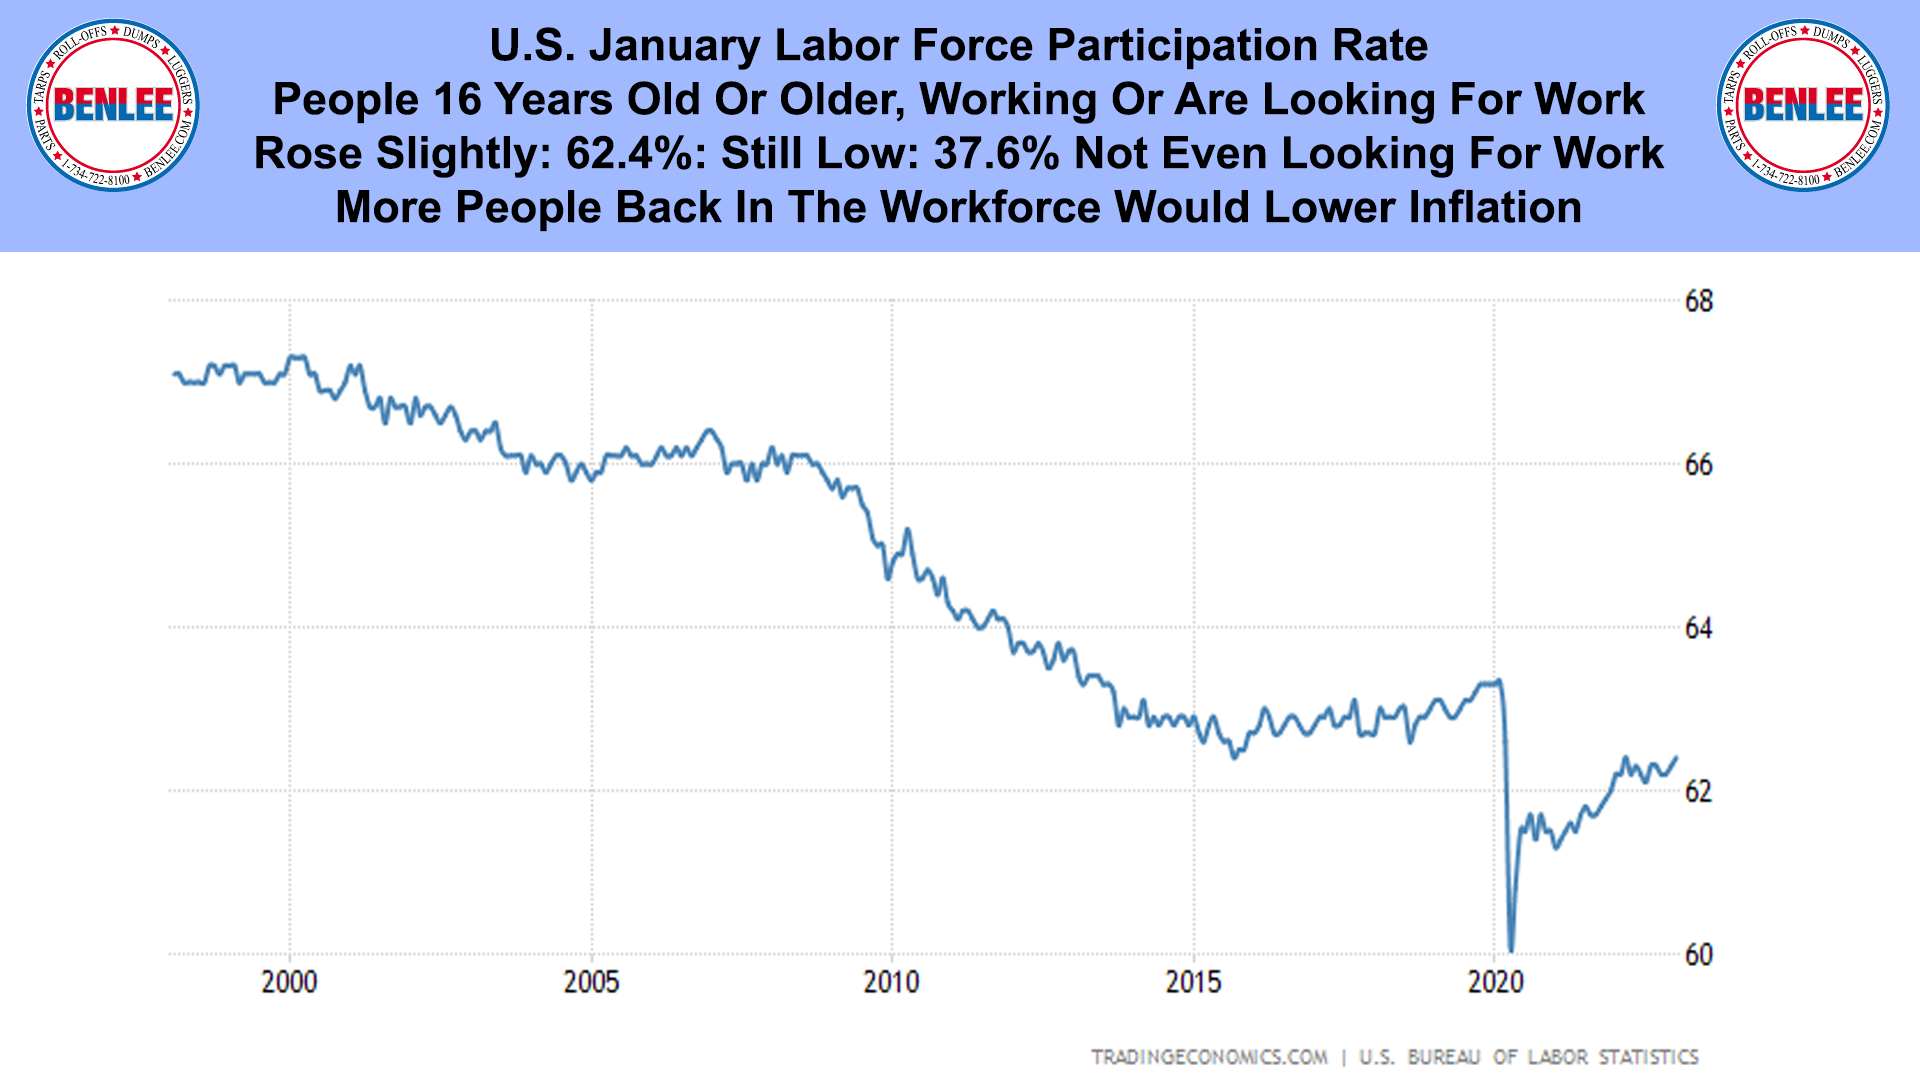 U.S. January Labor Force Participation Rate